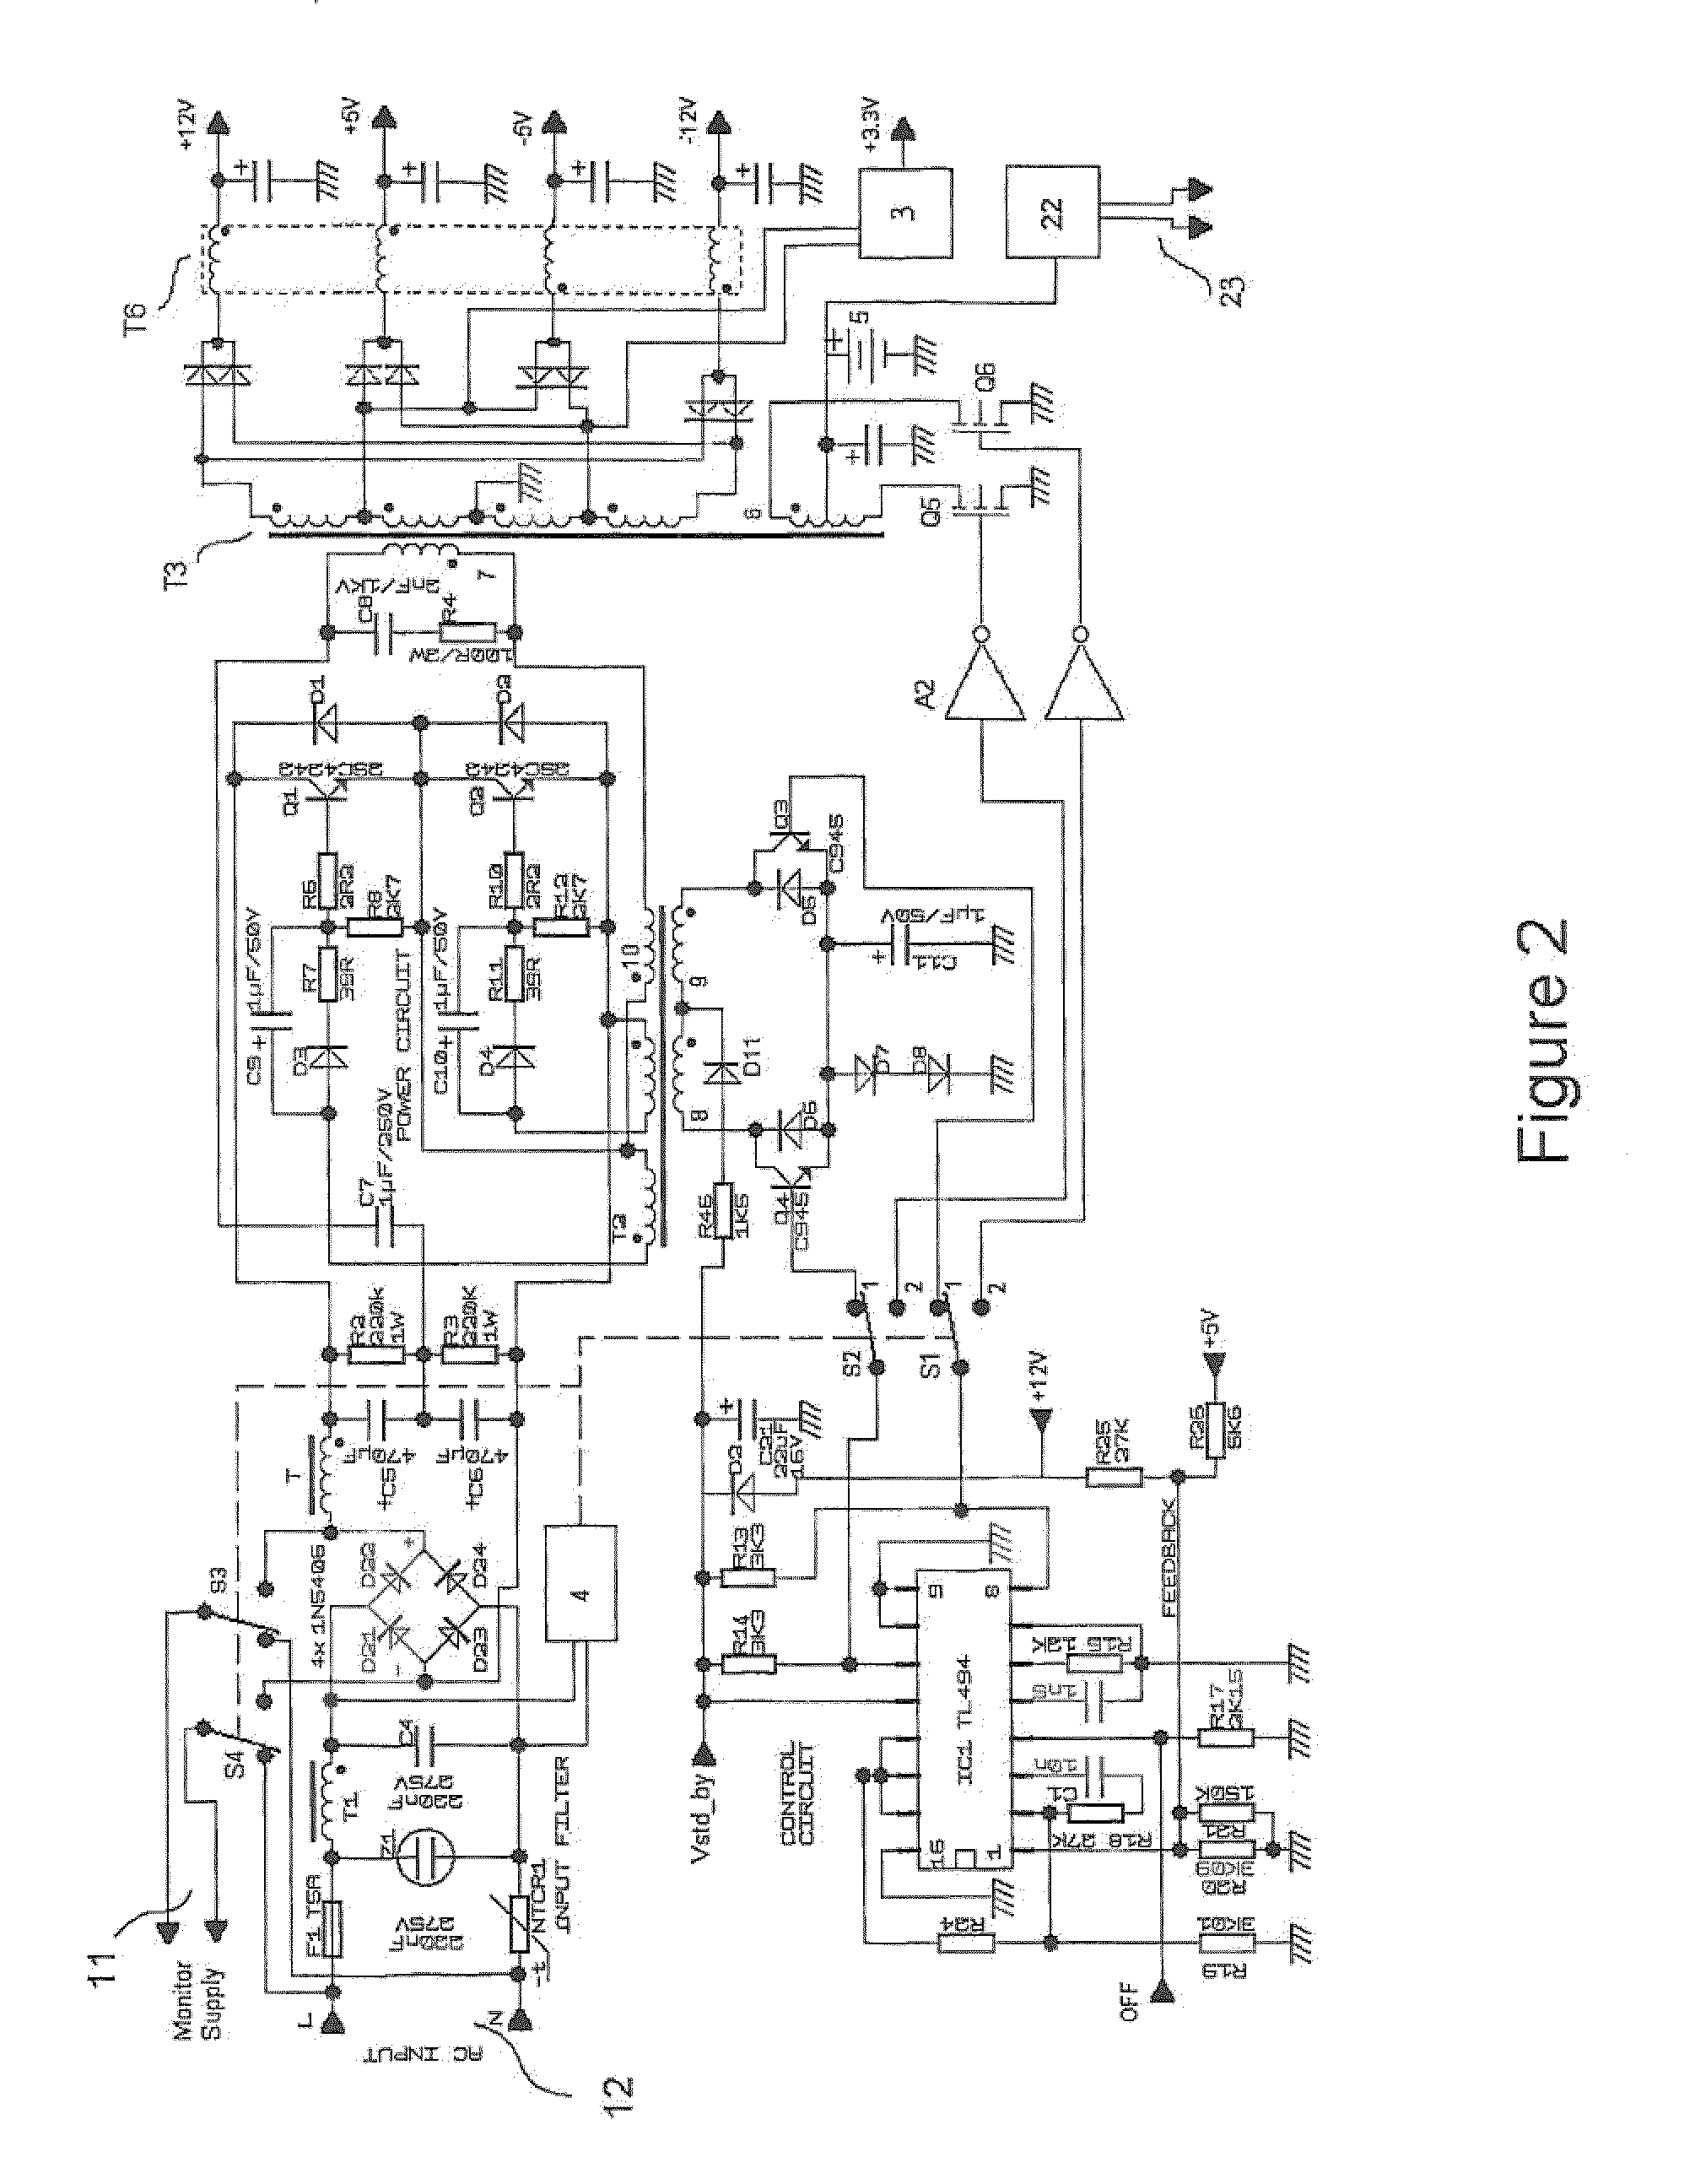 Smps circuit with multiple ac/dc inputs and application of such circuit to computer power supplies or laptop adapters